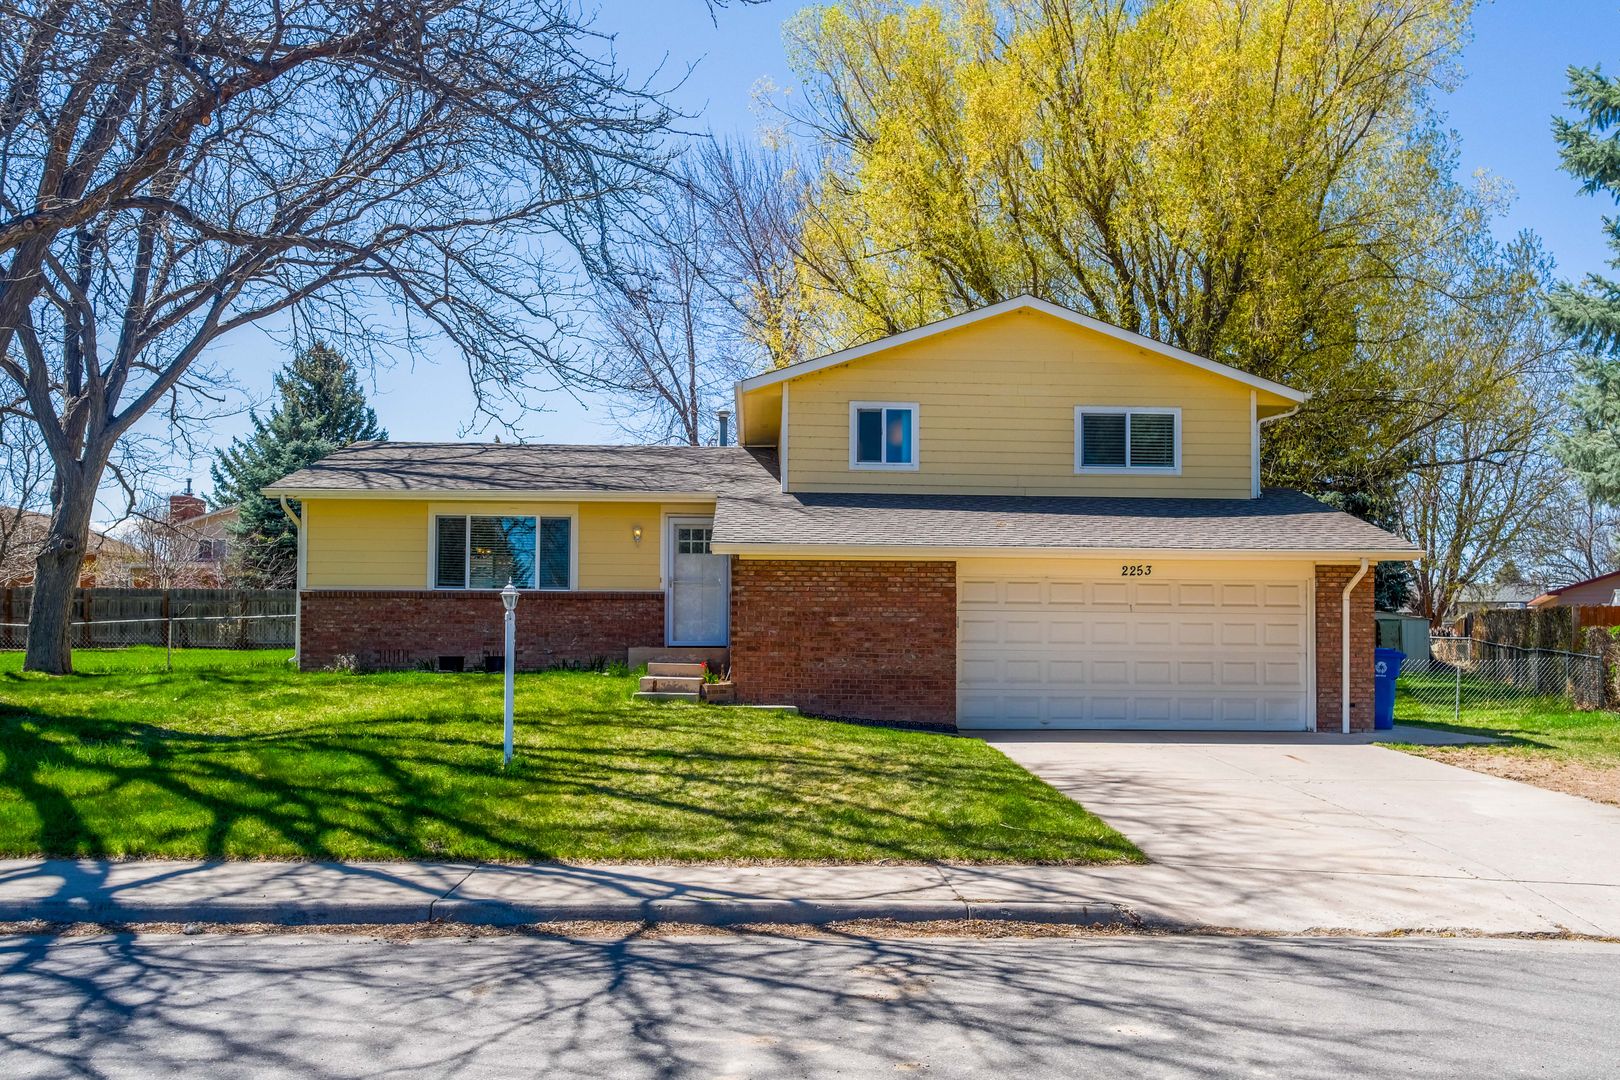 Beautiful 3-Bed 2-Bath Home in Loveland, CO!